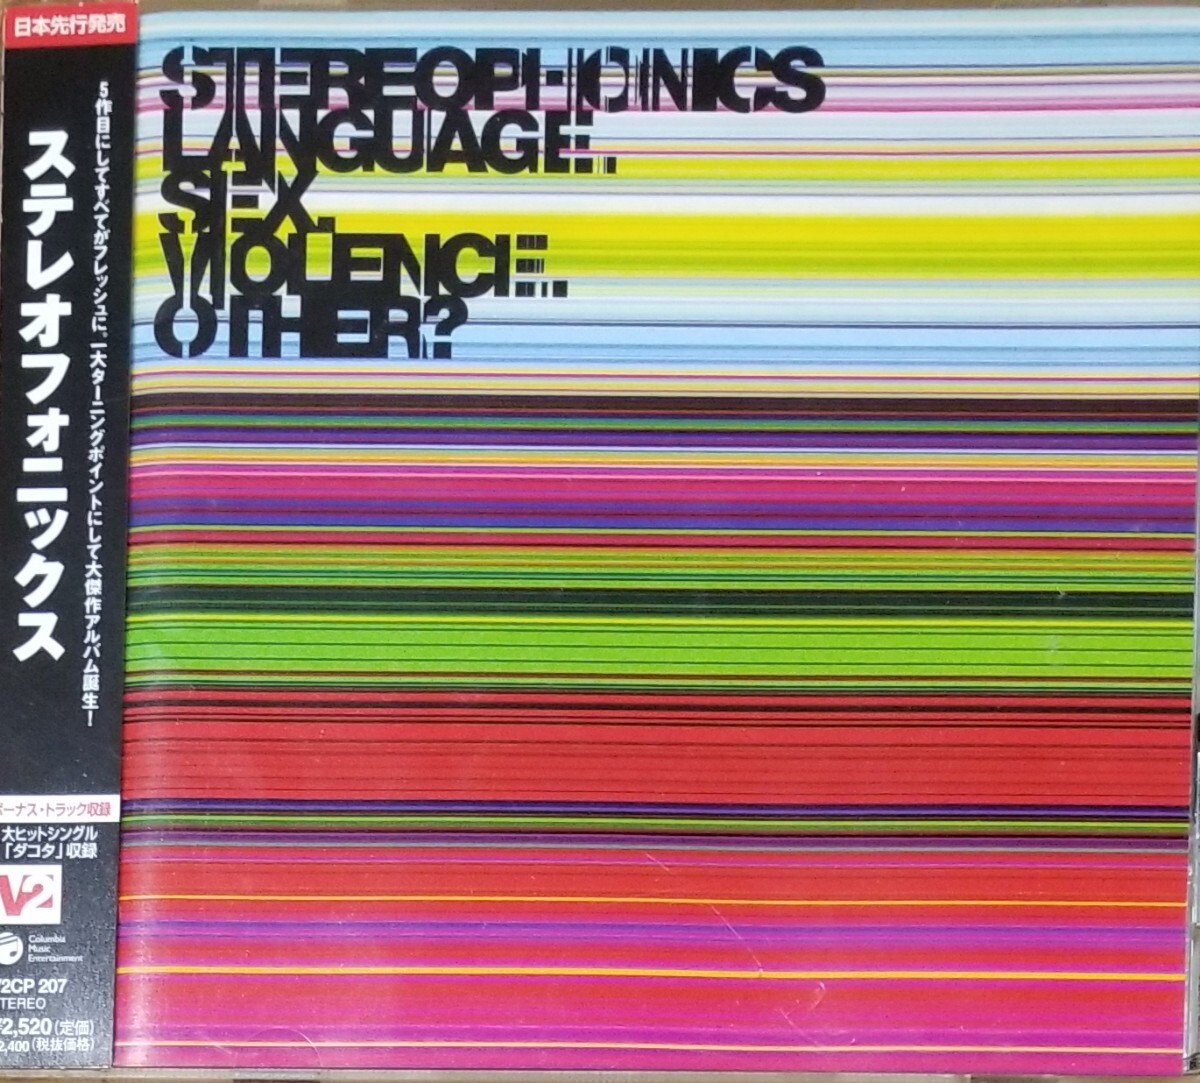 X17日本盤帯付き■STEREOPHONICS(ステレオフォニックス)「LanguageSexViolenceOther?」CD